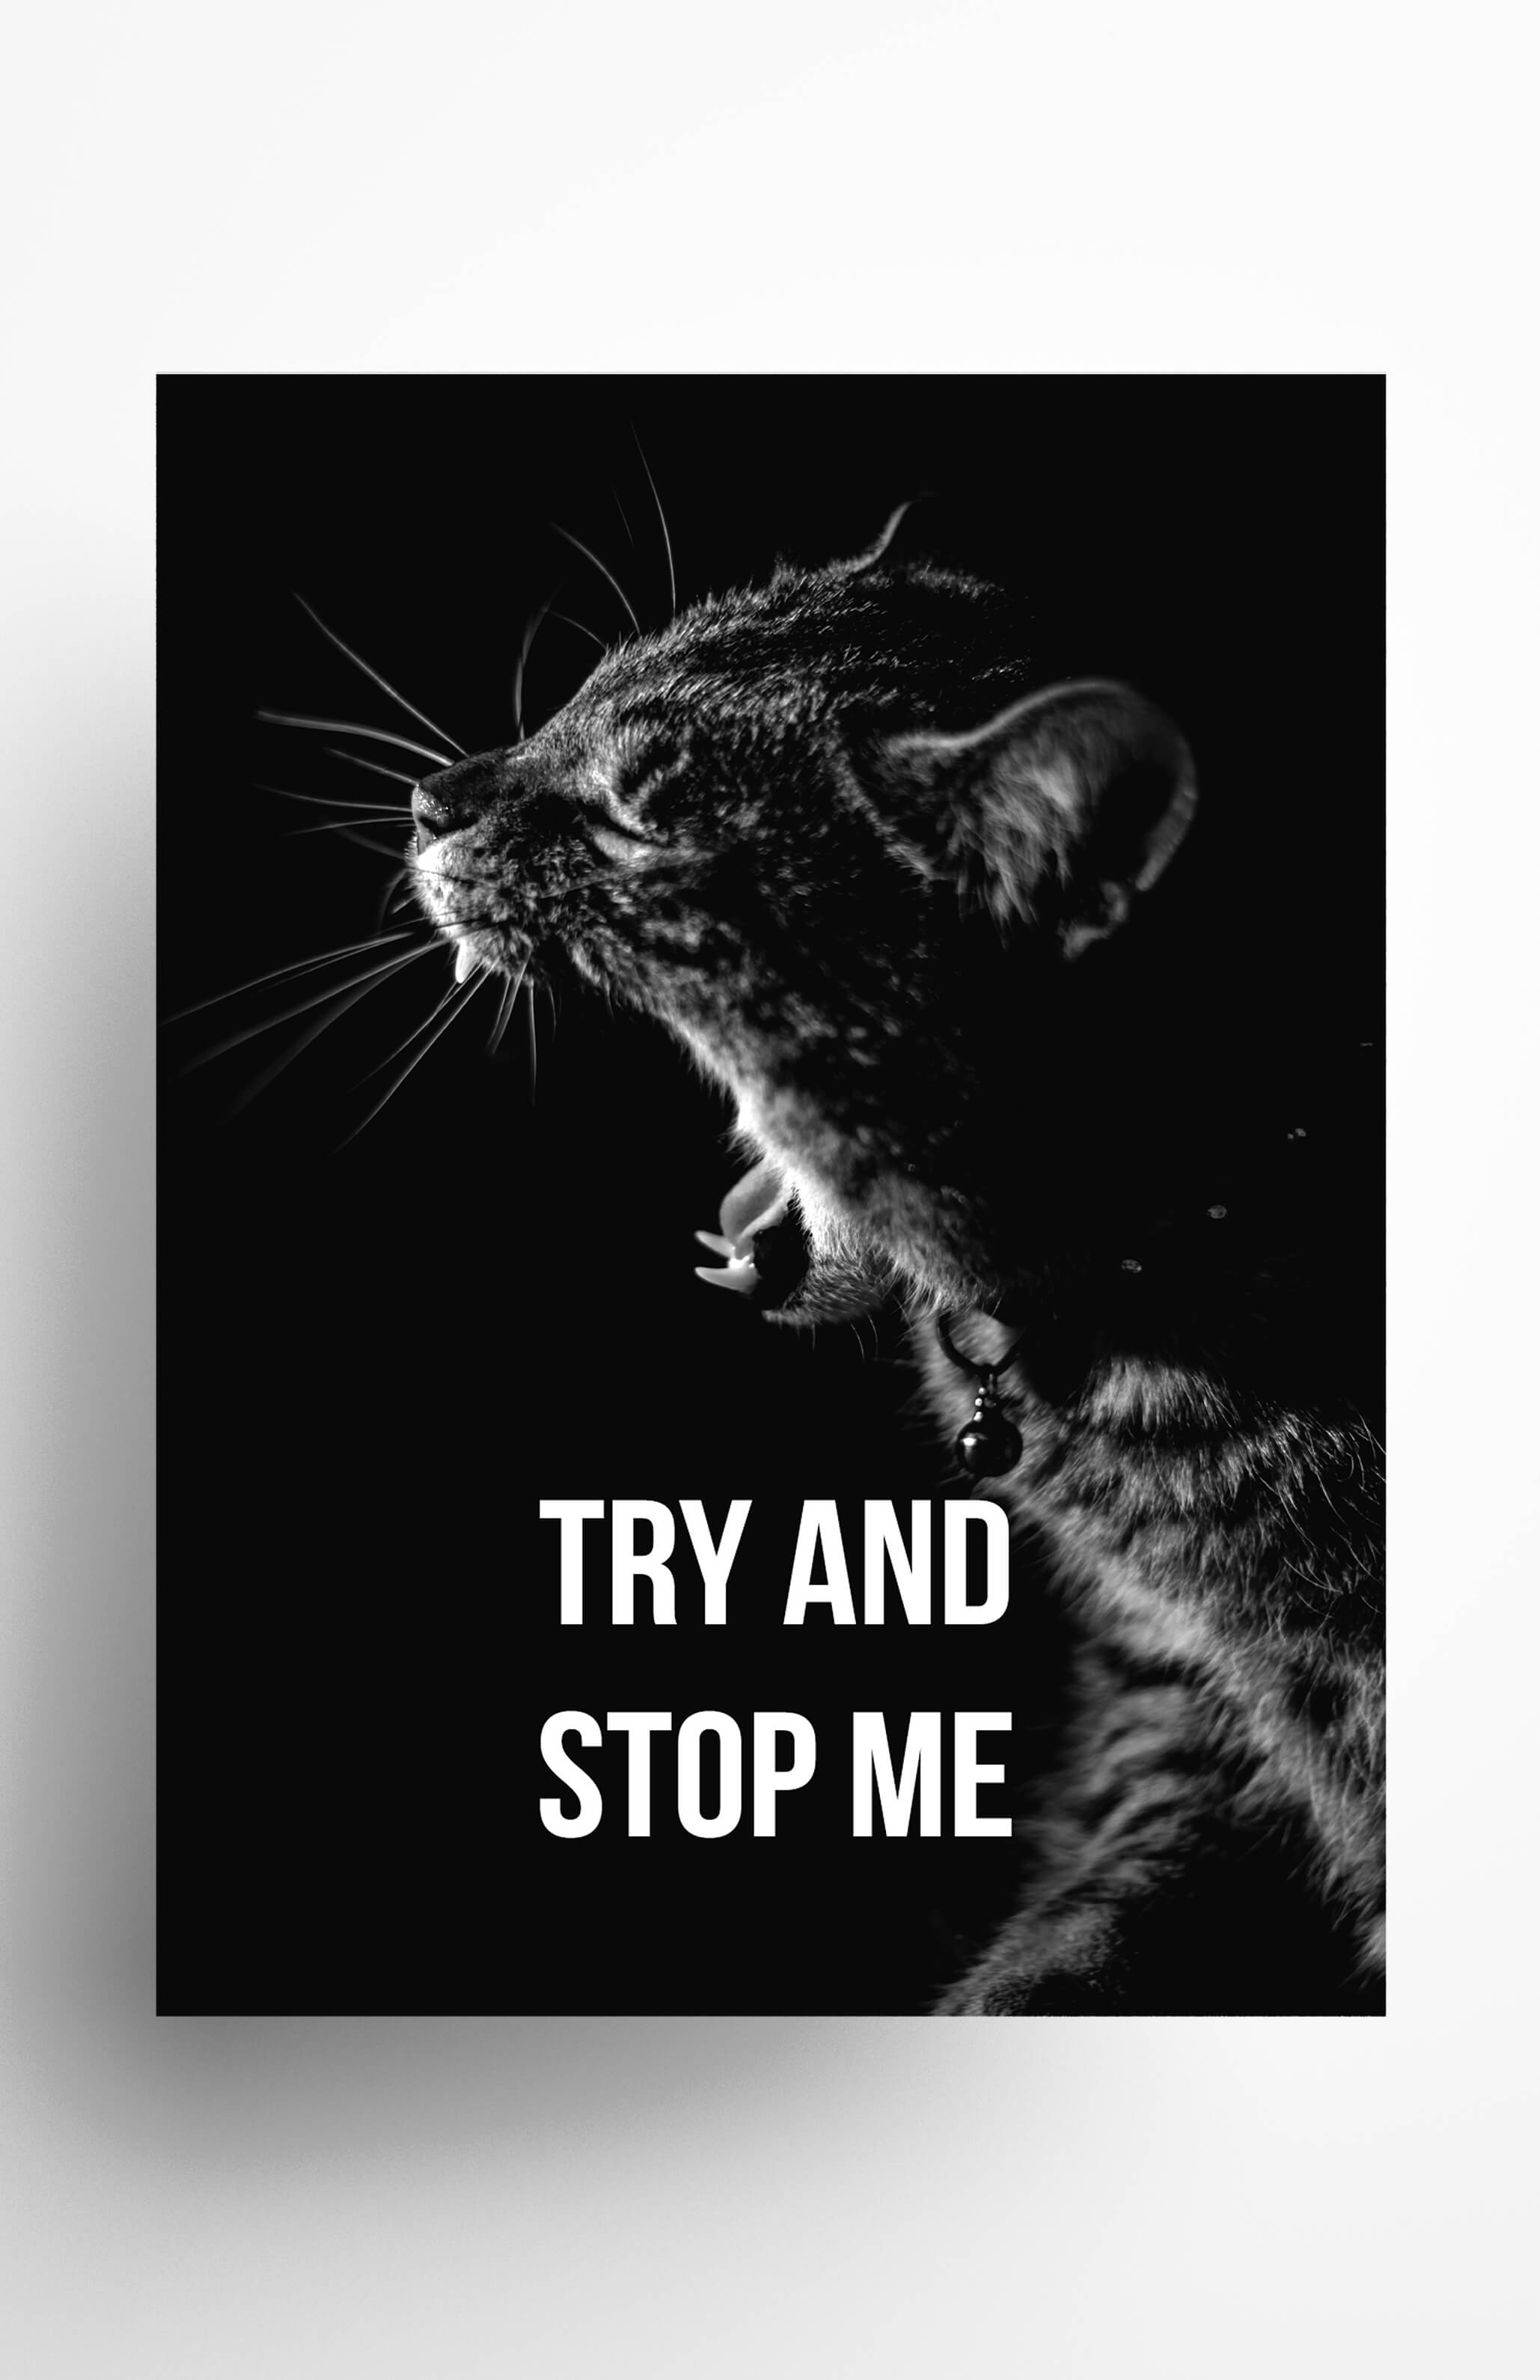 V3 Apparel womens Try and Stop Me, Motivational posters, mens inspirational wall artwork and empowering poster quote designs for office, home gym, school, kitchen and living room.